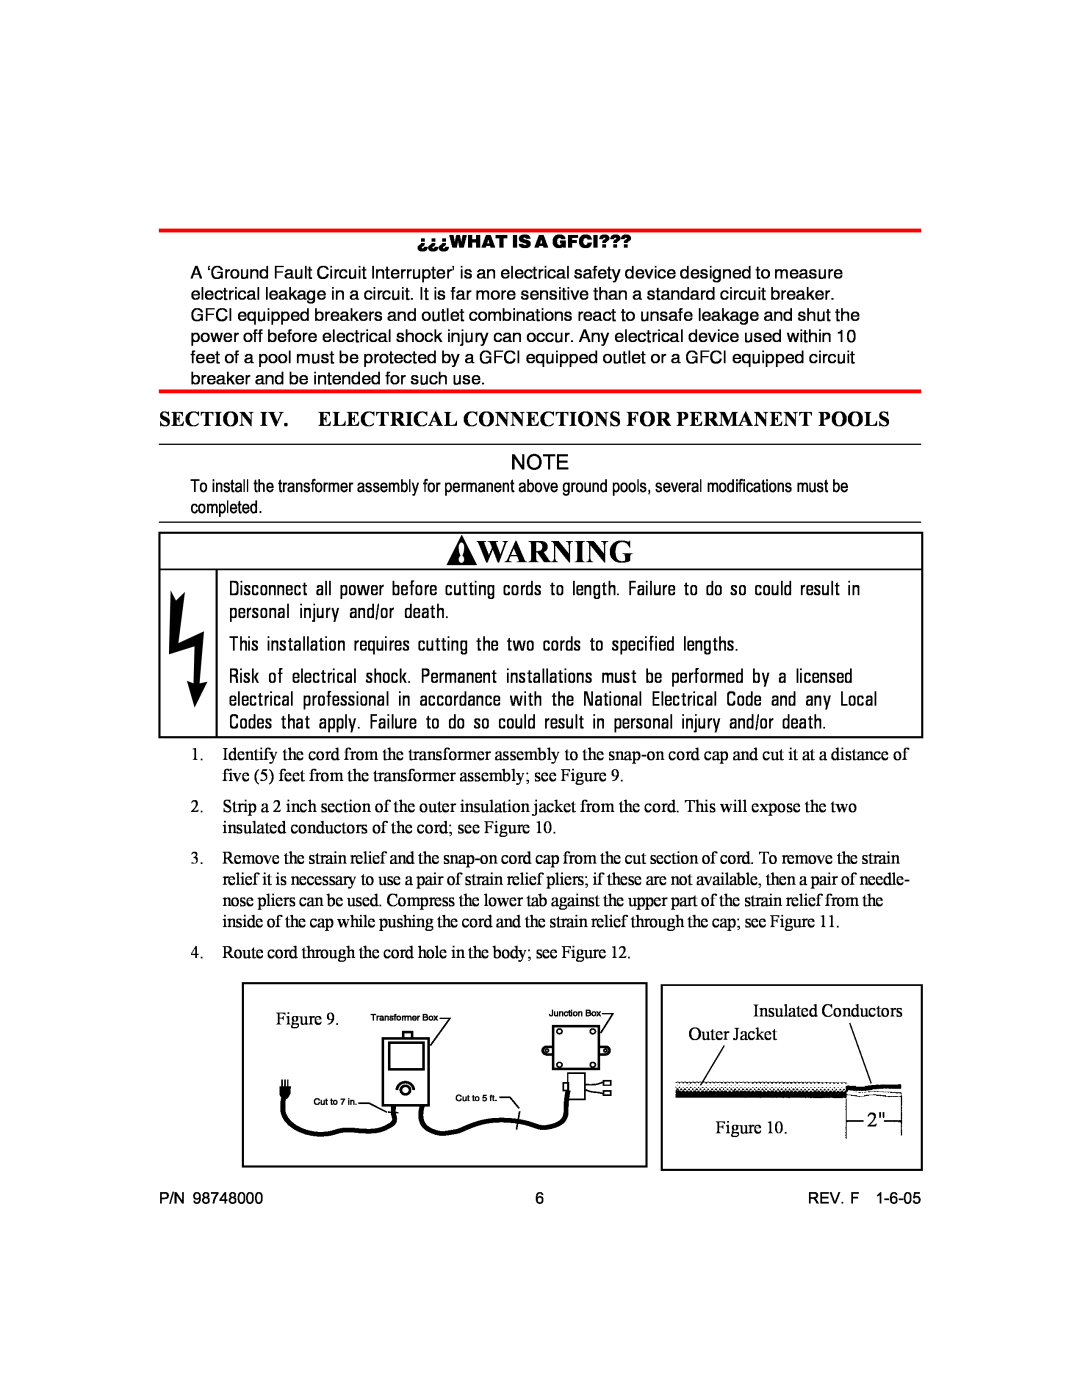 Pentair Quasar owner manual ¿¿¿What Is A Gfci???, Insulated Conductors Outer Jacket 